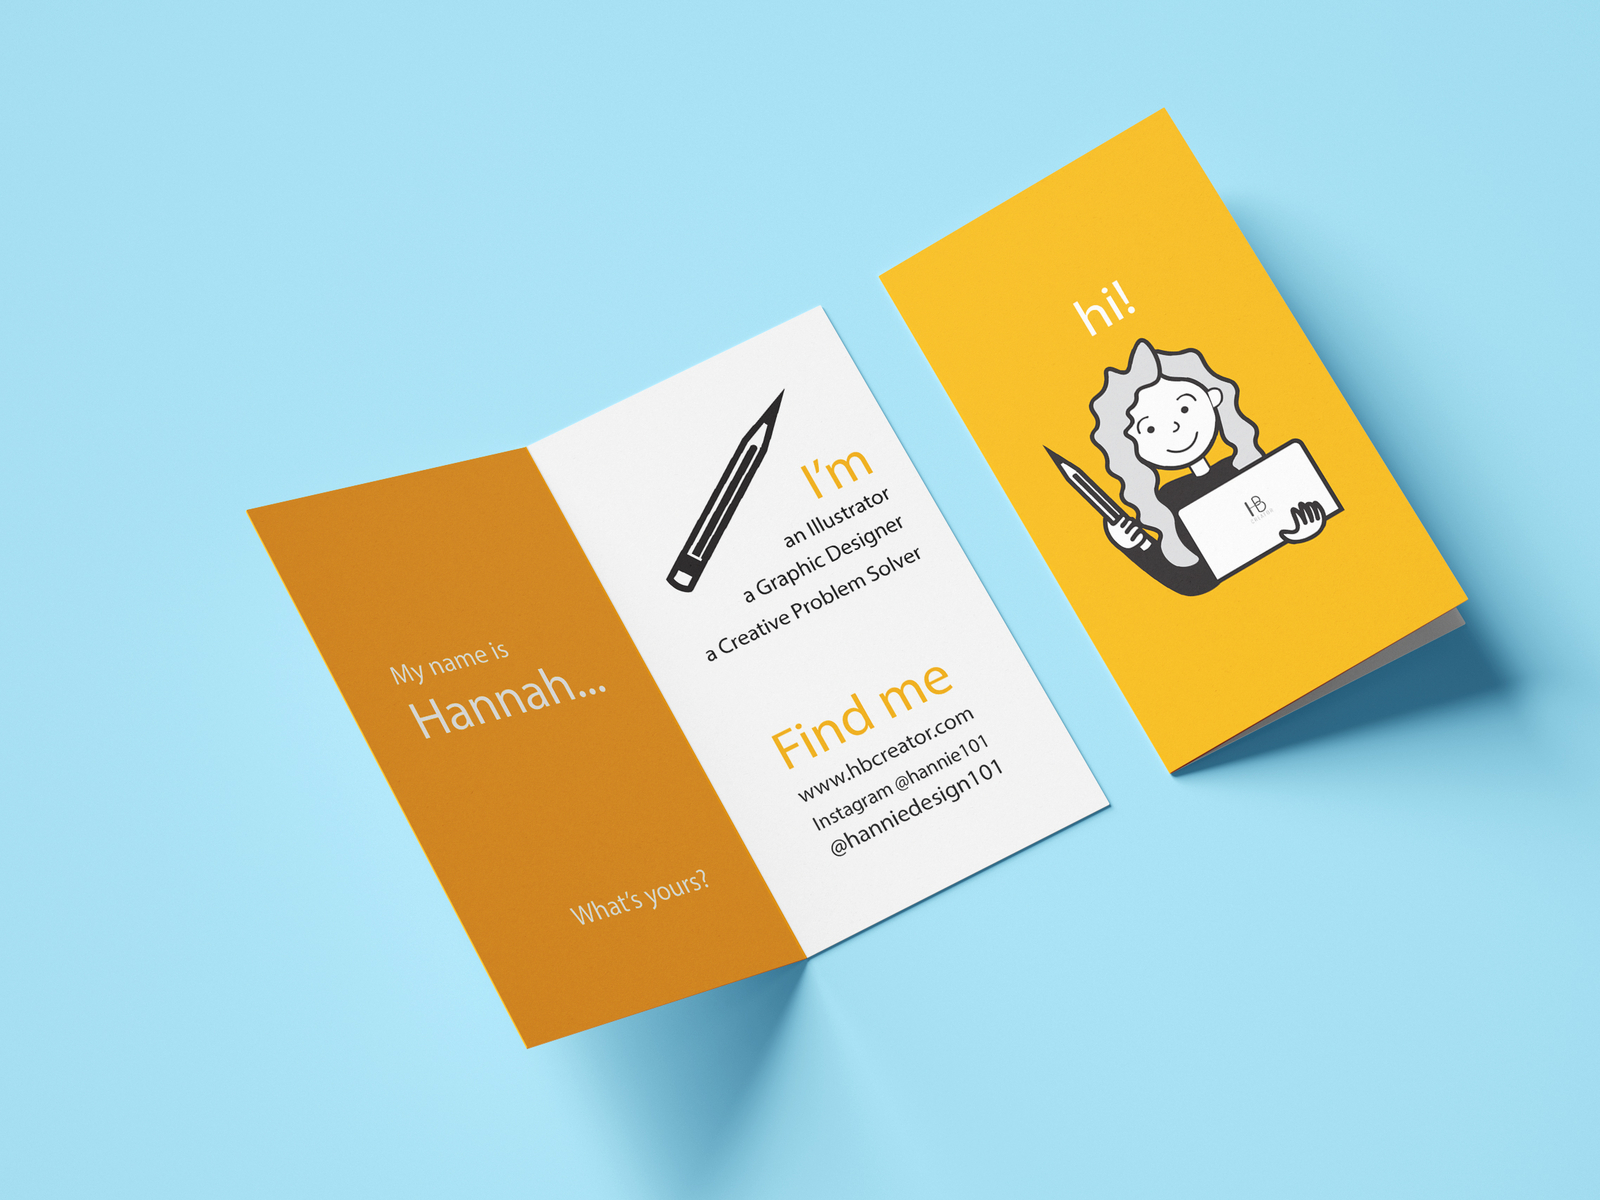 Folded Business Card for Graphic Designer by Hannah Bryce on Dribbble